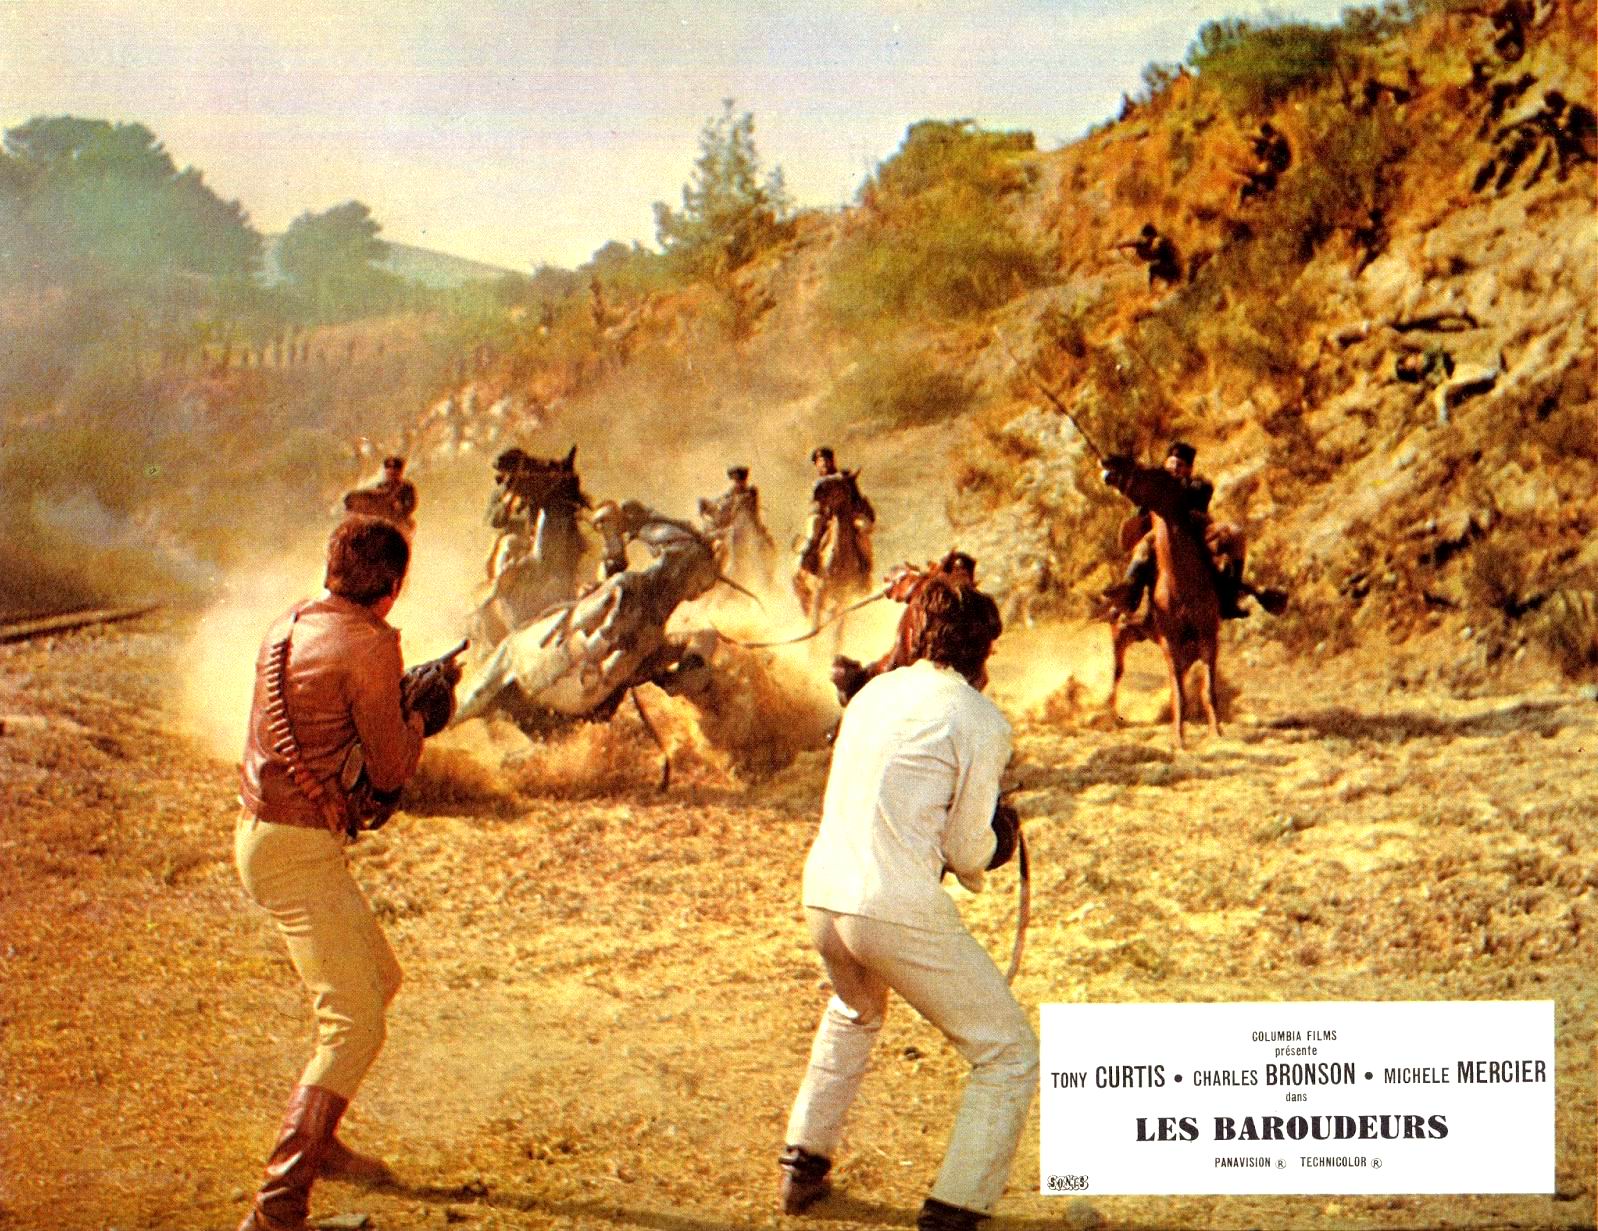 Les baroudeurs (1969) Peter Collinson - You can't win 'em all (21.07.1969 / 10.1969)